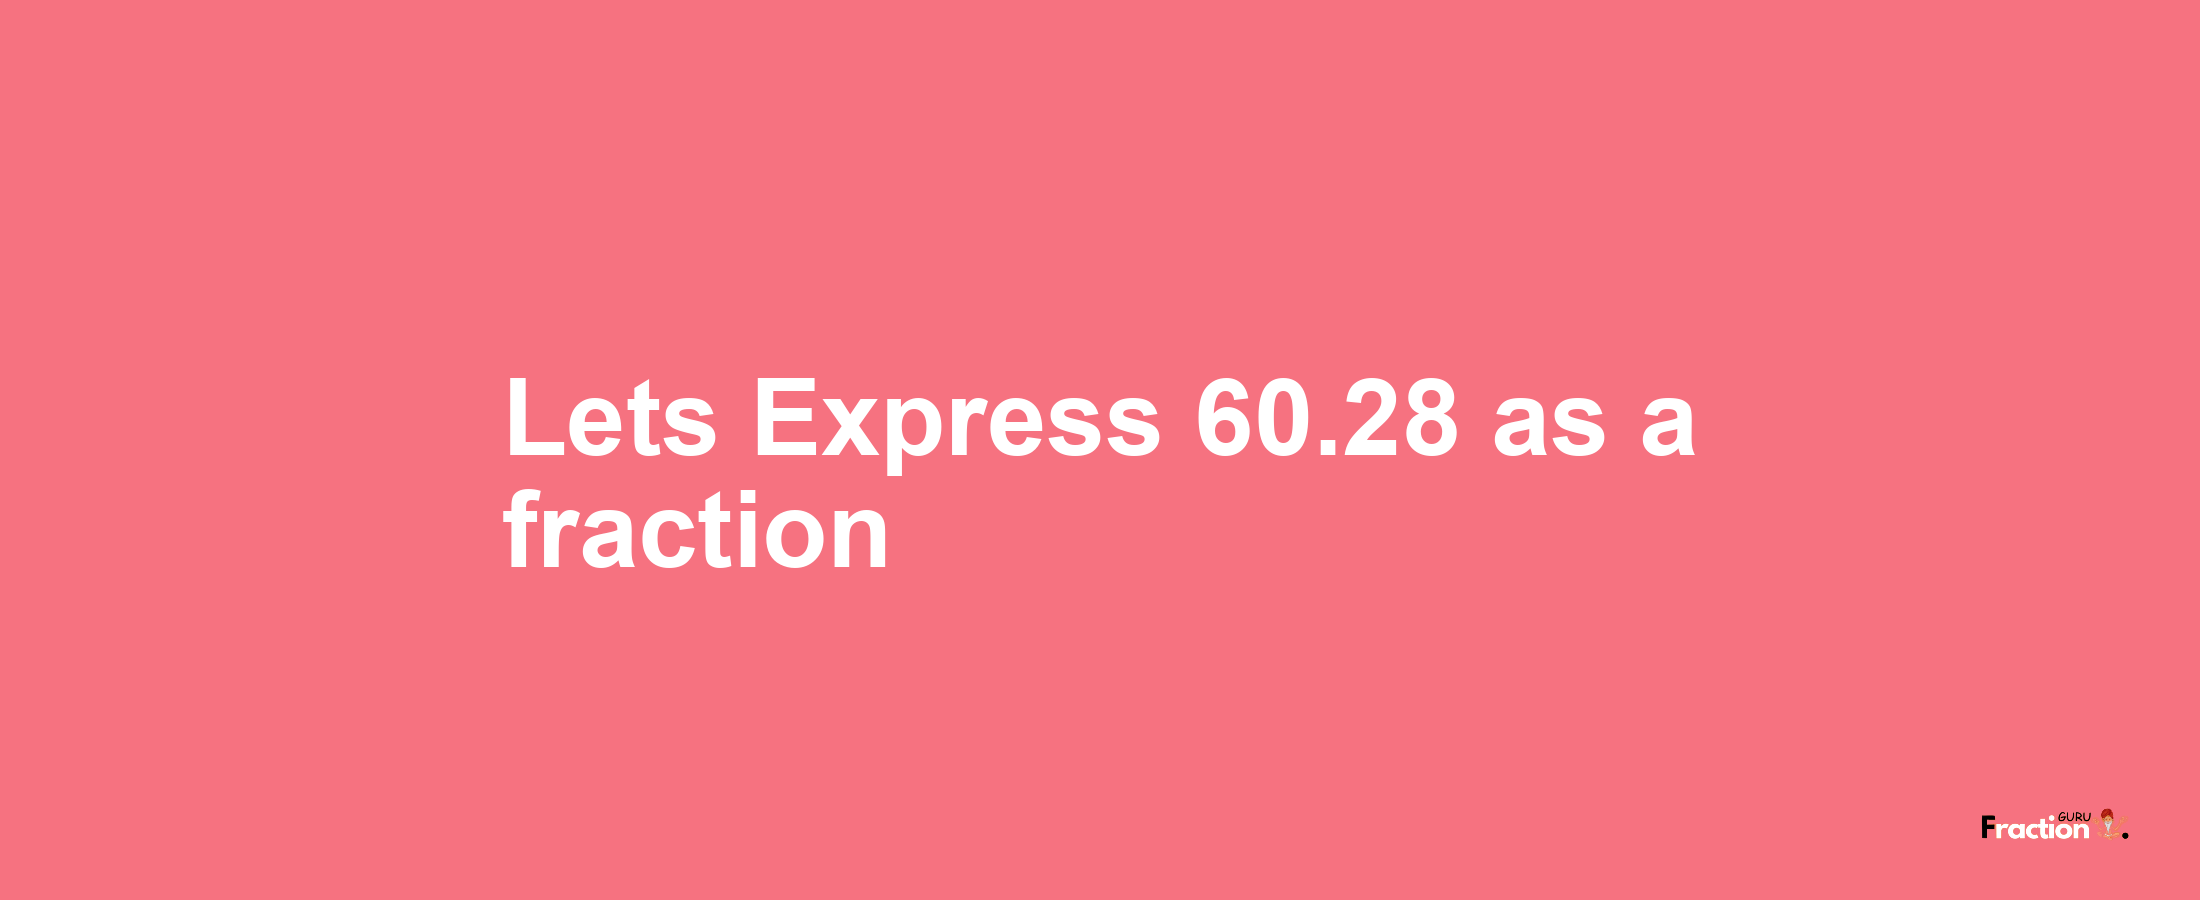 Lets Express 60.28 as afraction